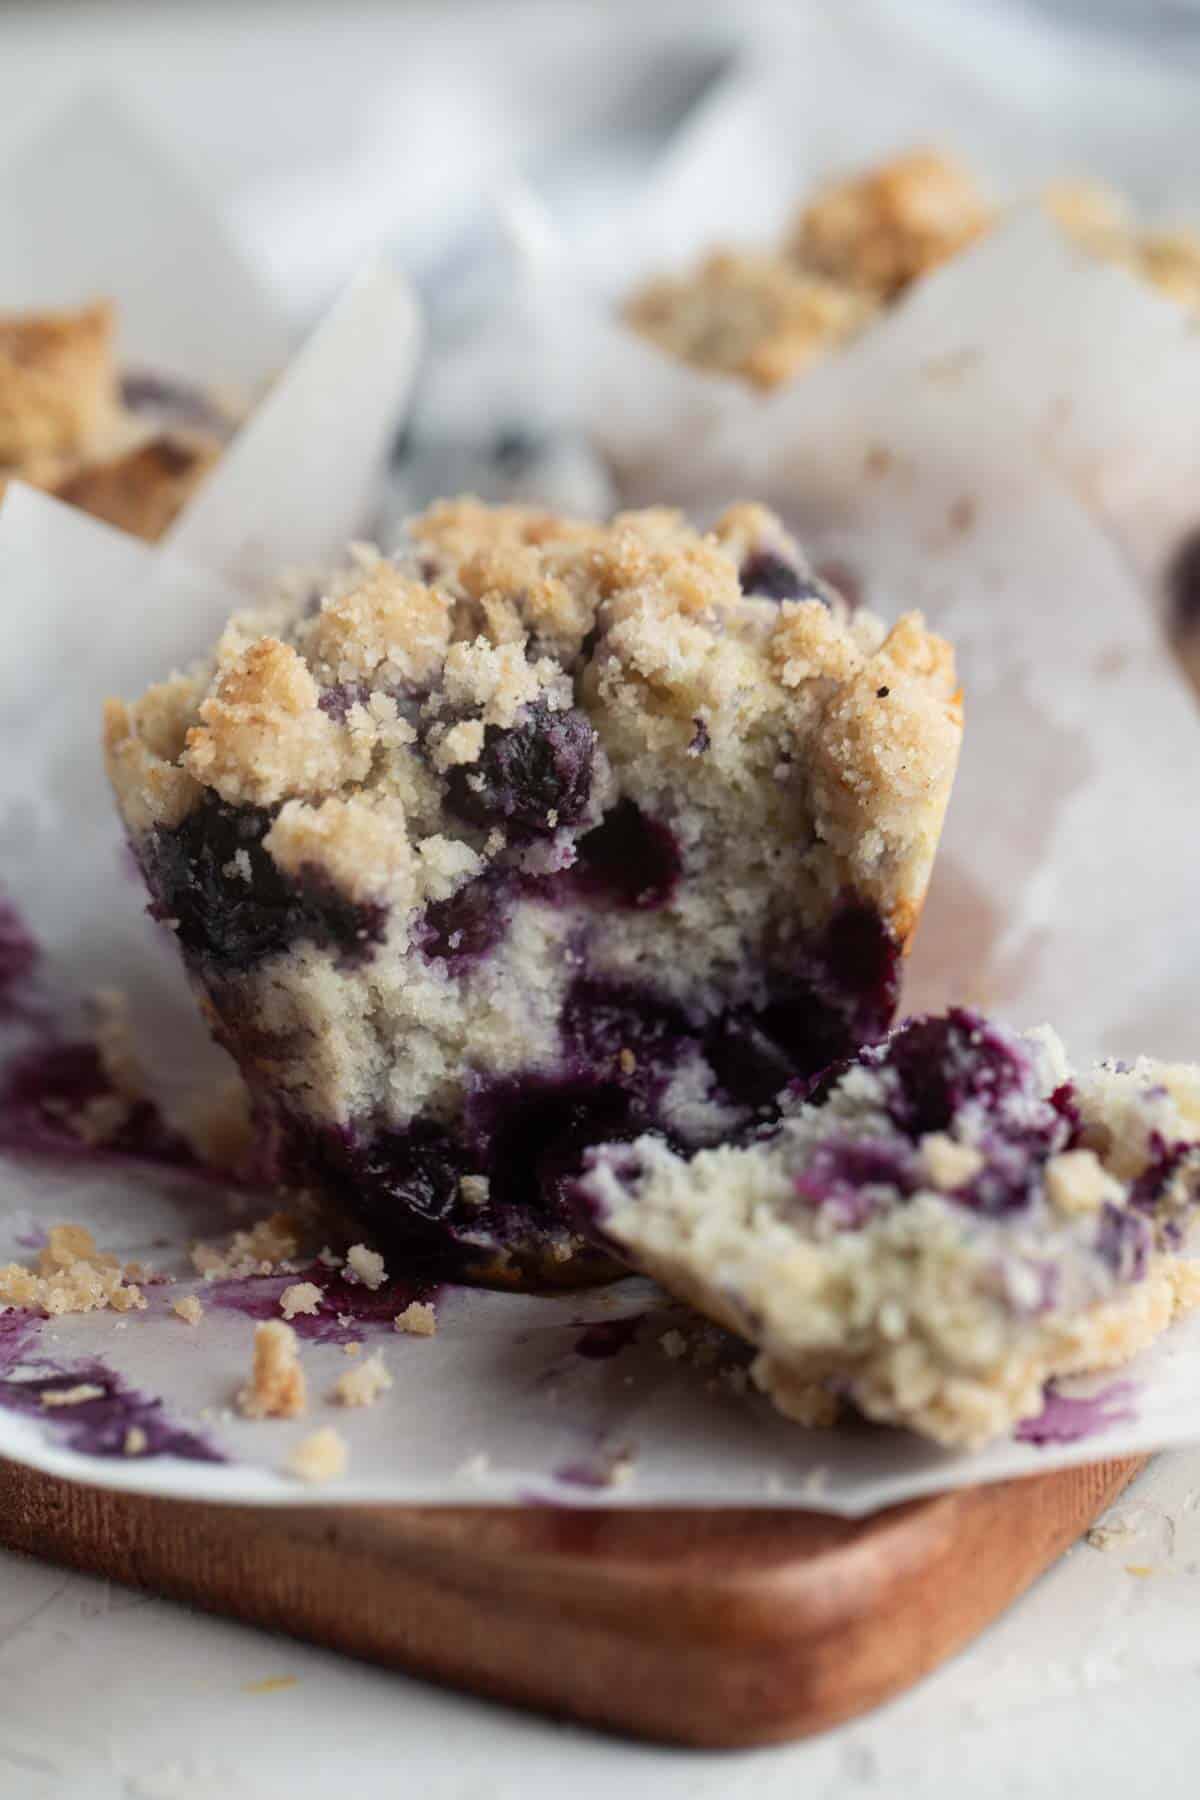 Blueberry muffin torn in half to show interior texture of the muffin.